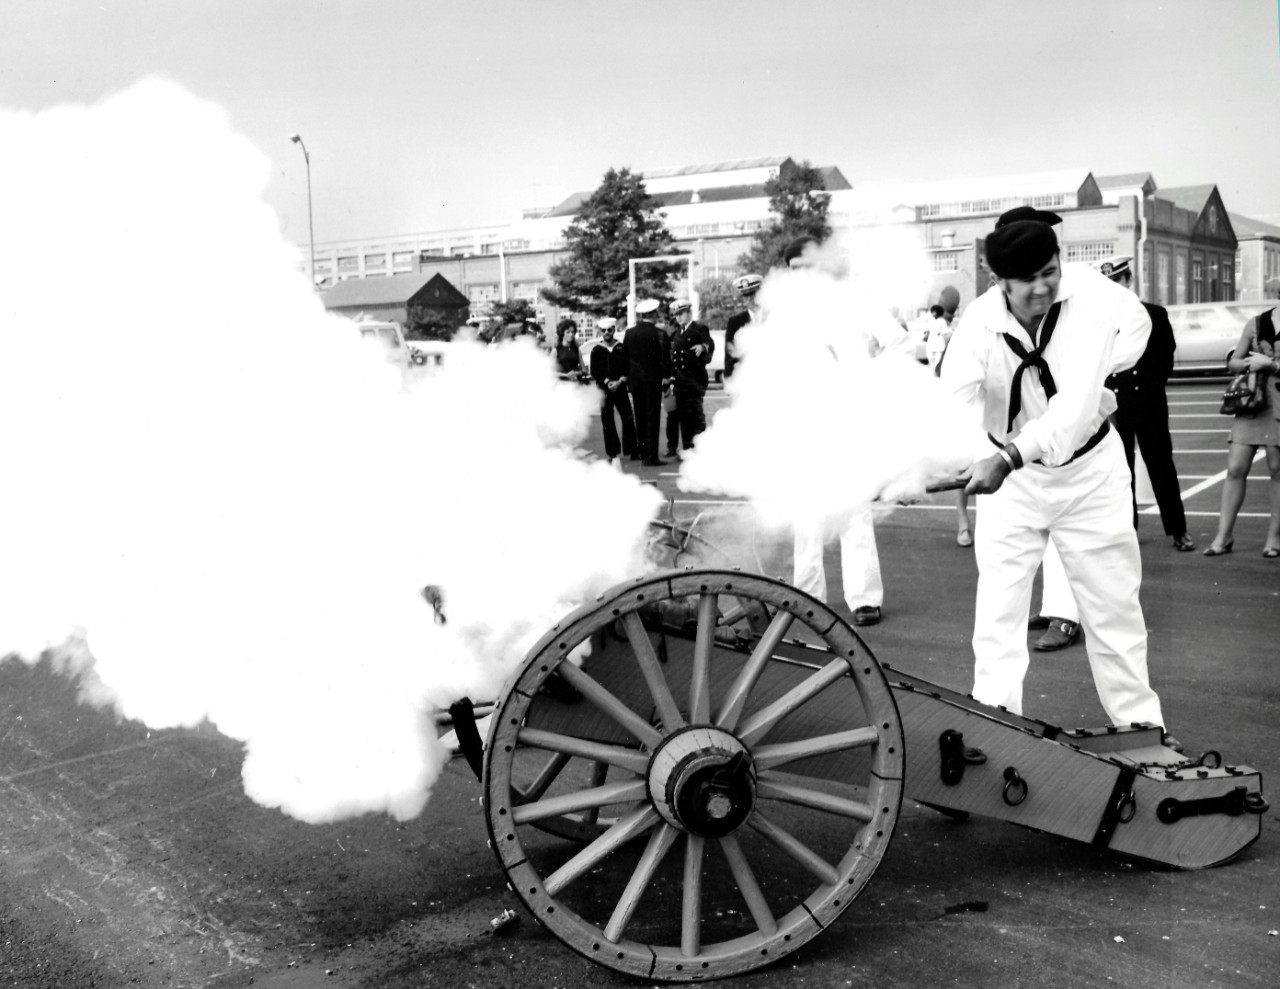 NMUSN-41:   Replica Cannons fired for 25th Anniversary of the Navy Museum, October 1987.   In celebration of the 25th Anniversary, replica cannons are fired towards the Anacostia River, Washington Navy Yard, Washington, D.C.   National Museum of the U.S. Navy Photograph Collection. 